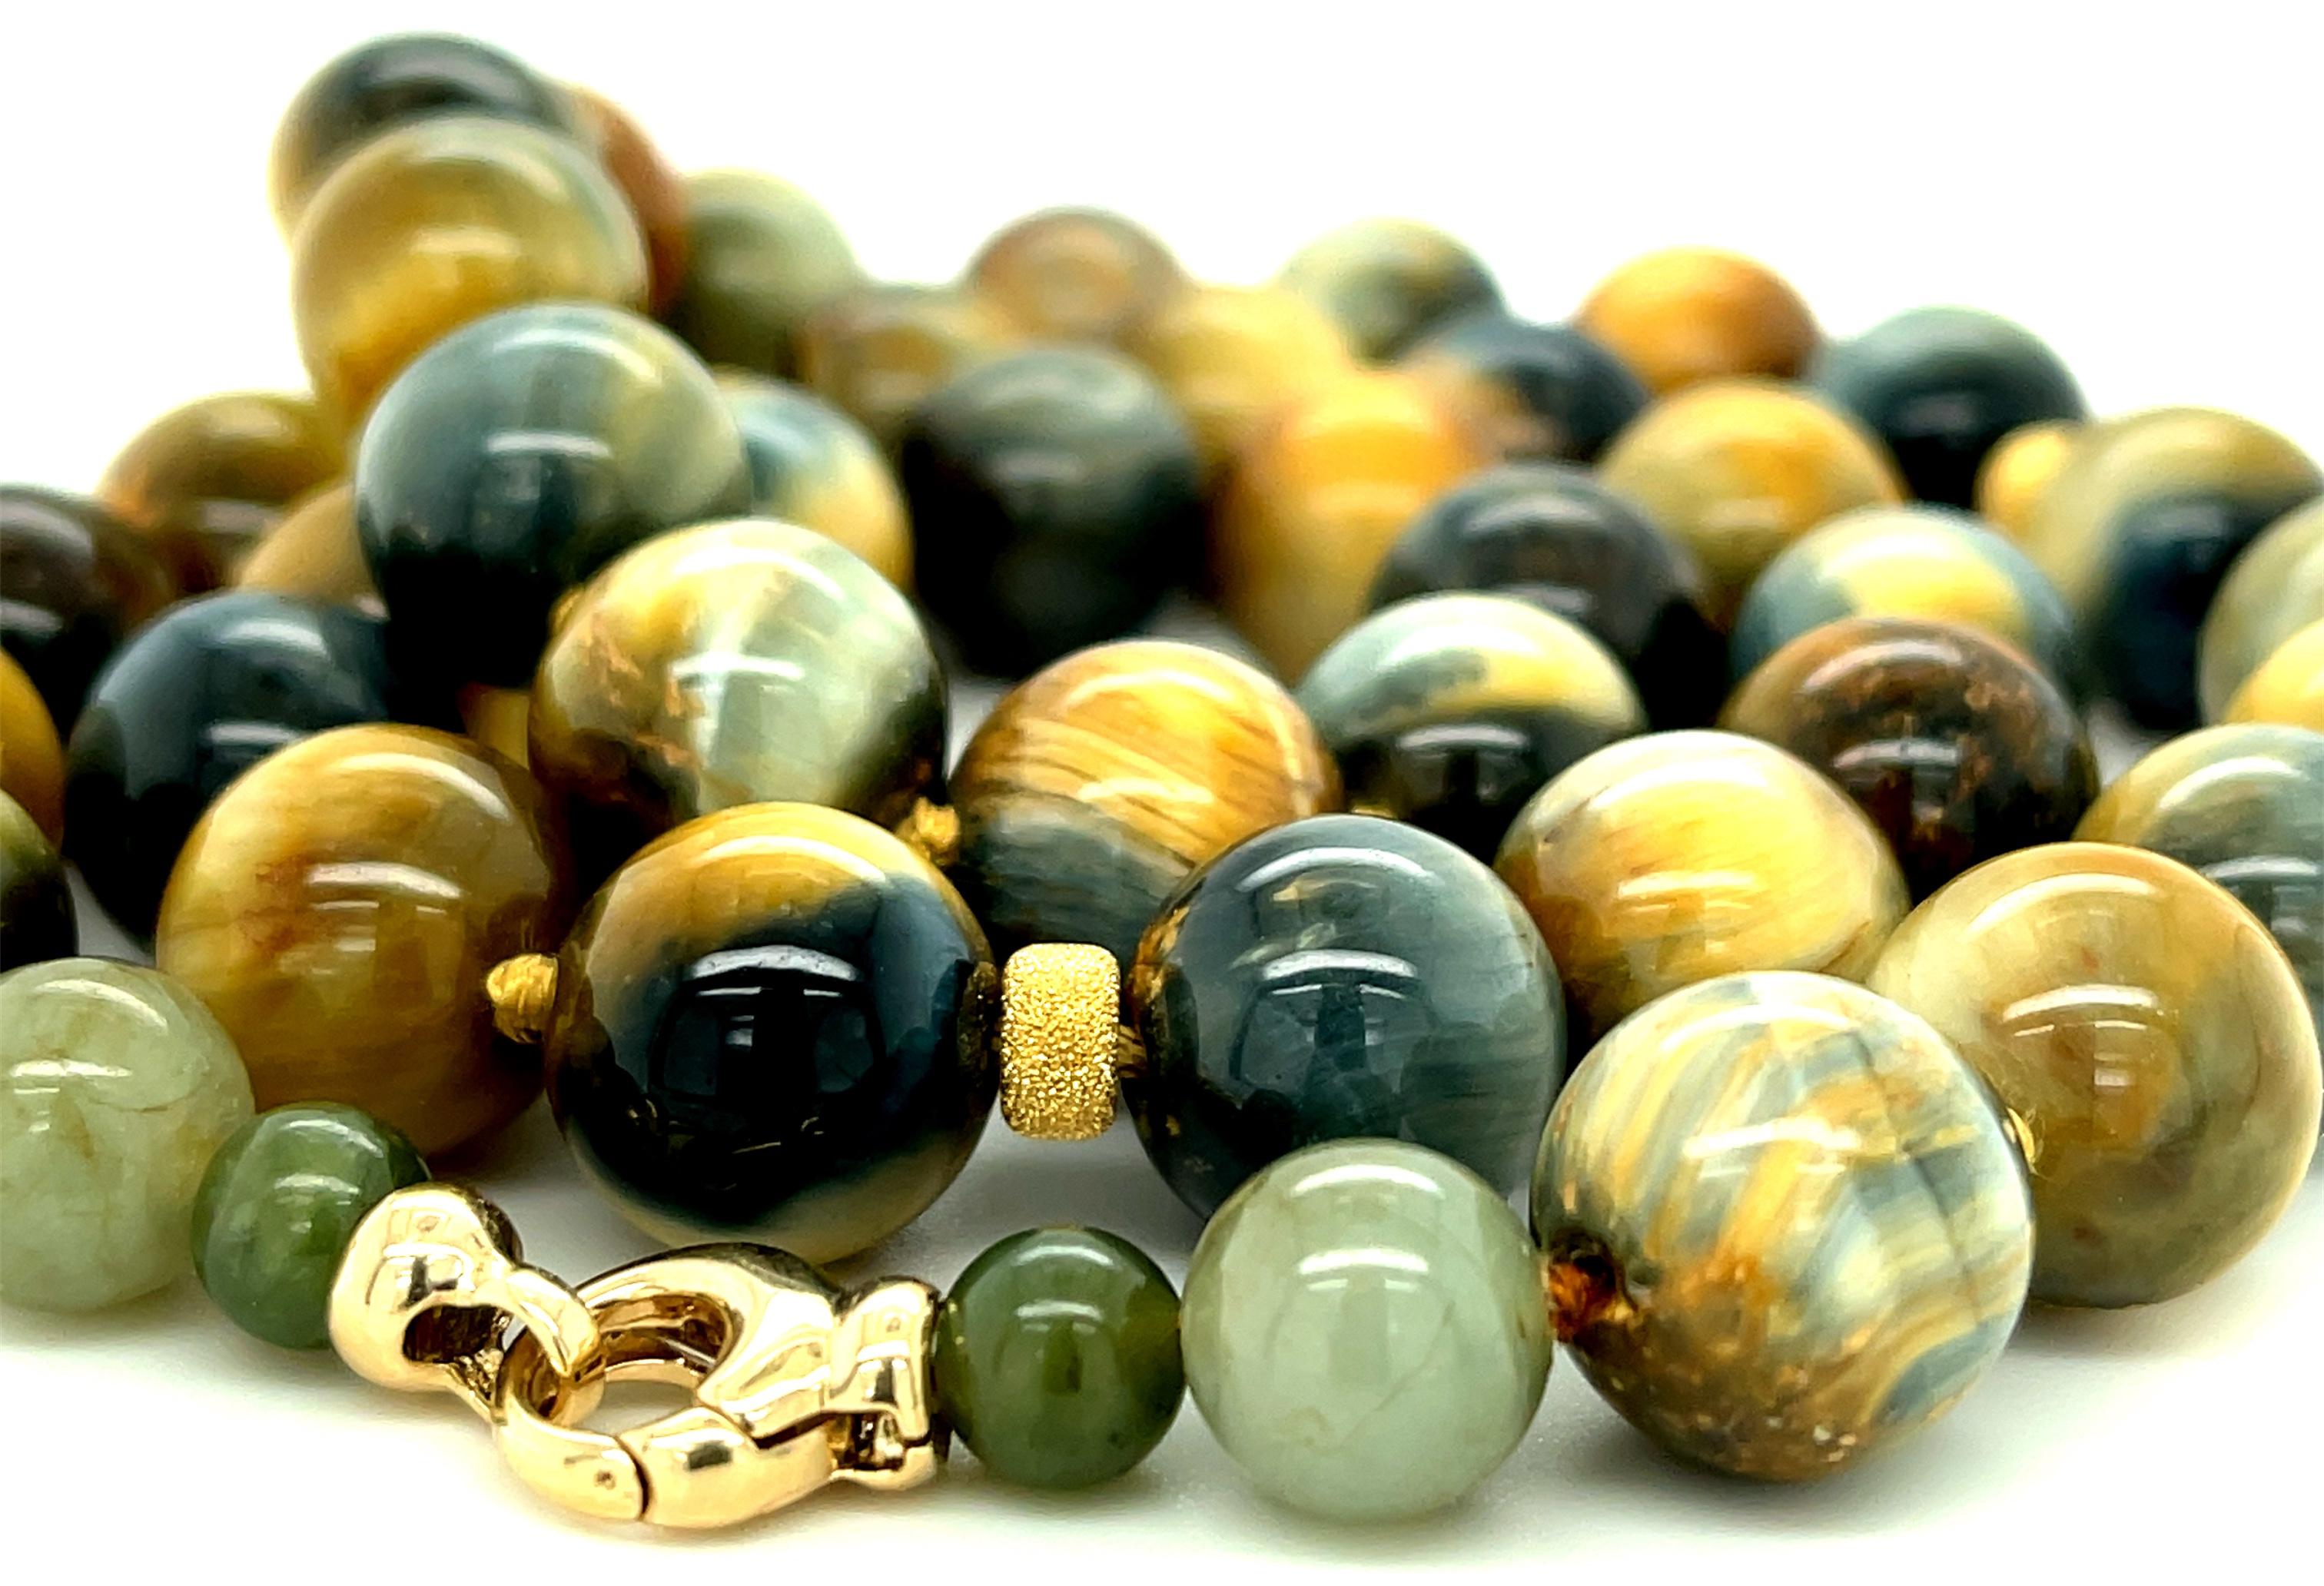 This 22-inch strand of beautiful 12mm cat's eye and falcon's eye quartz beads is so neutral that it can be worn with virtually any color. Cat's-eye quartz is cousin to the well-known tiger's-eye quartz, but displays greenish yellow and brownish